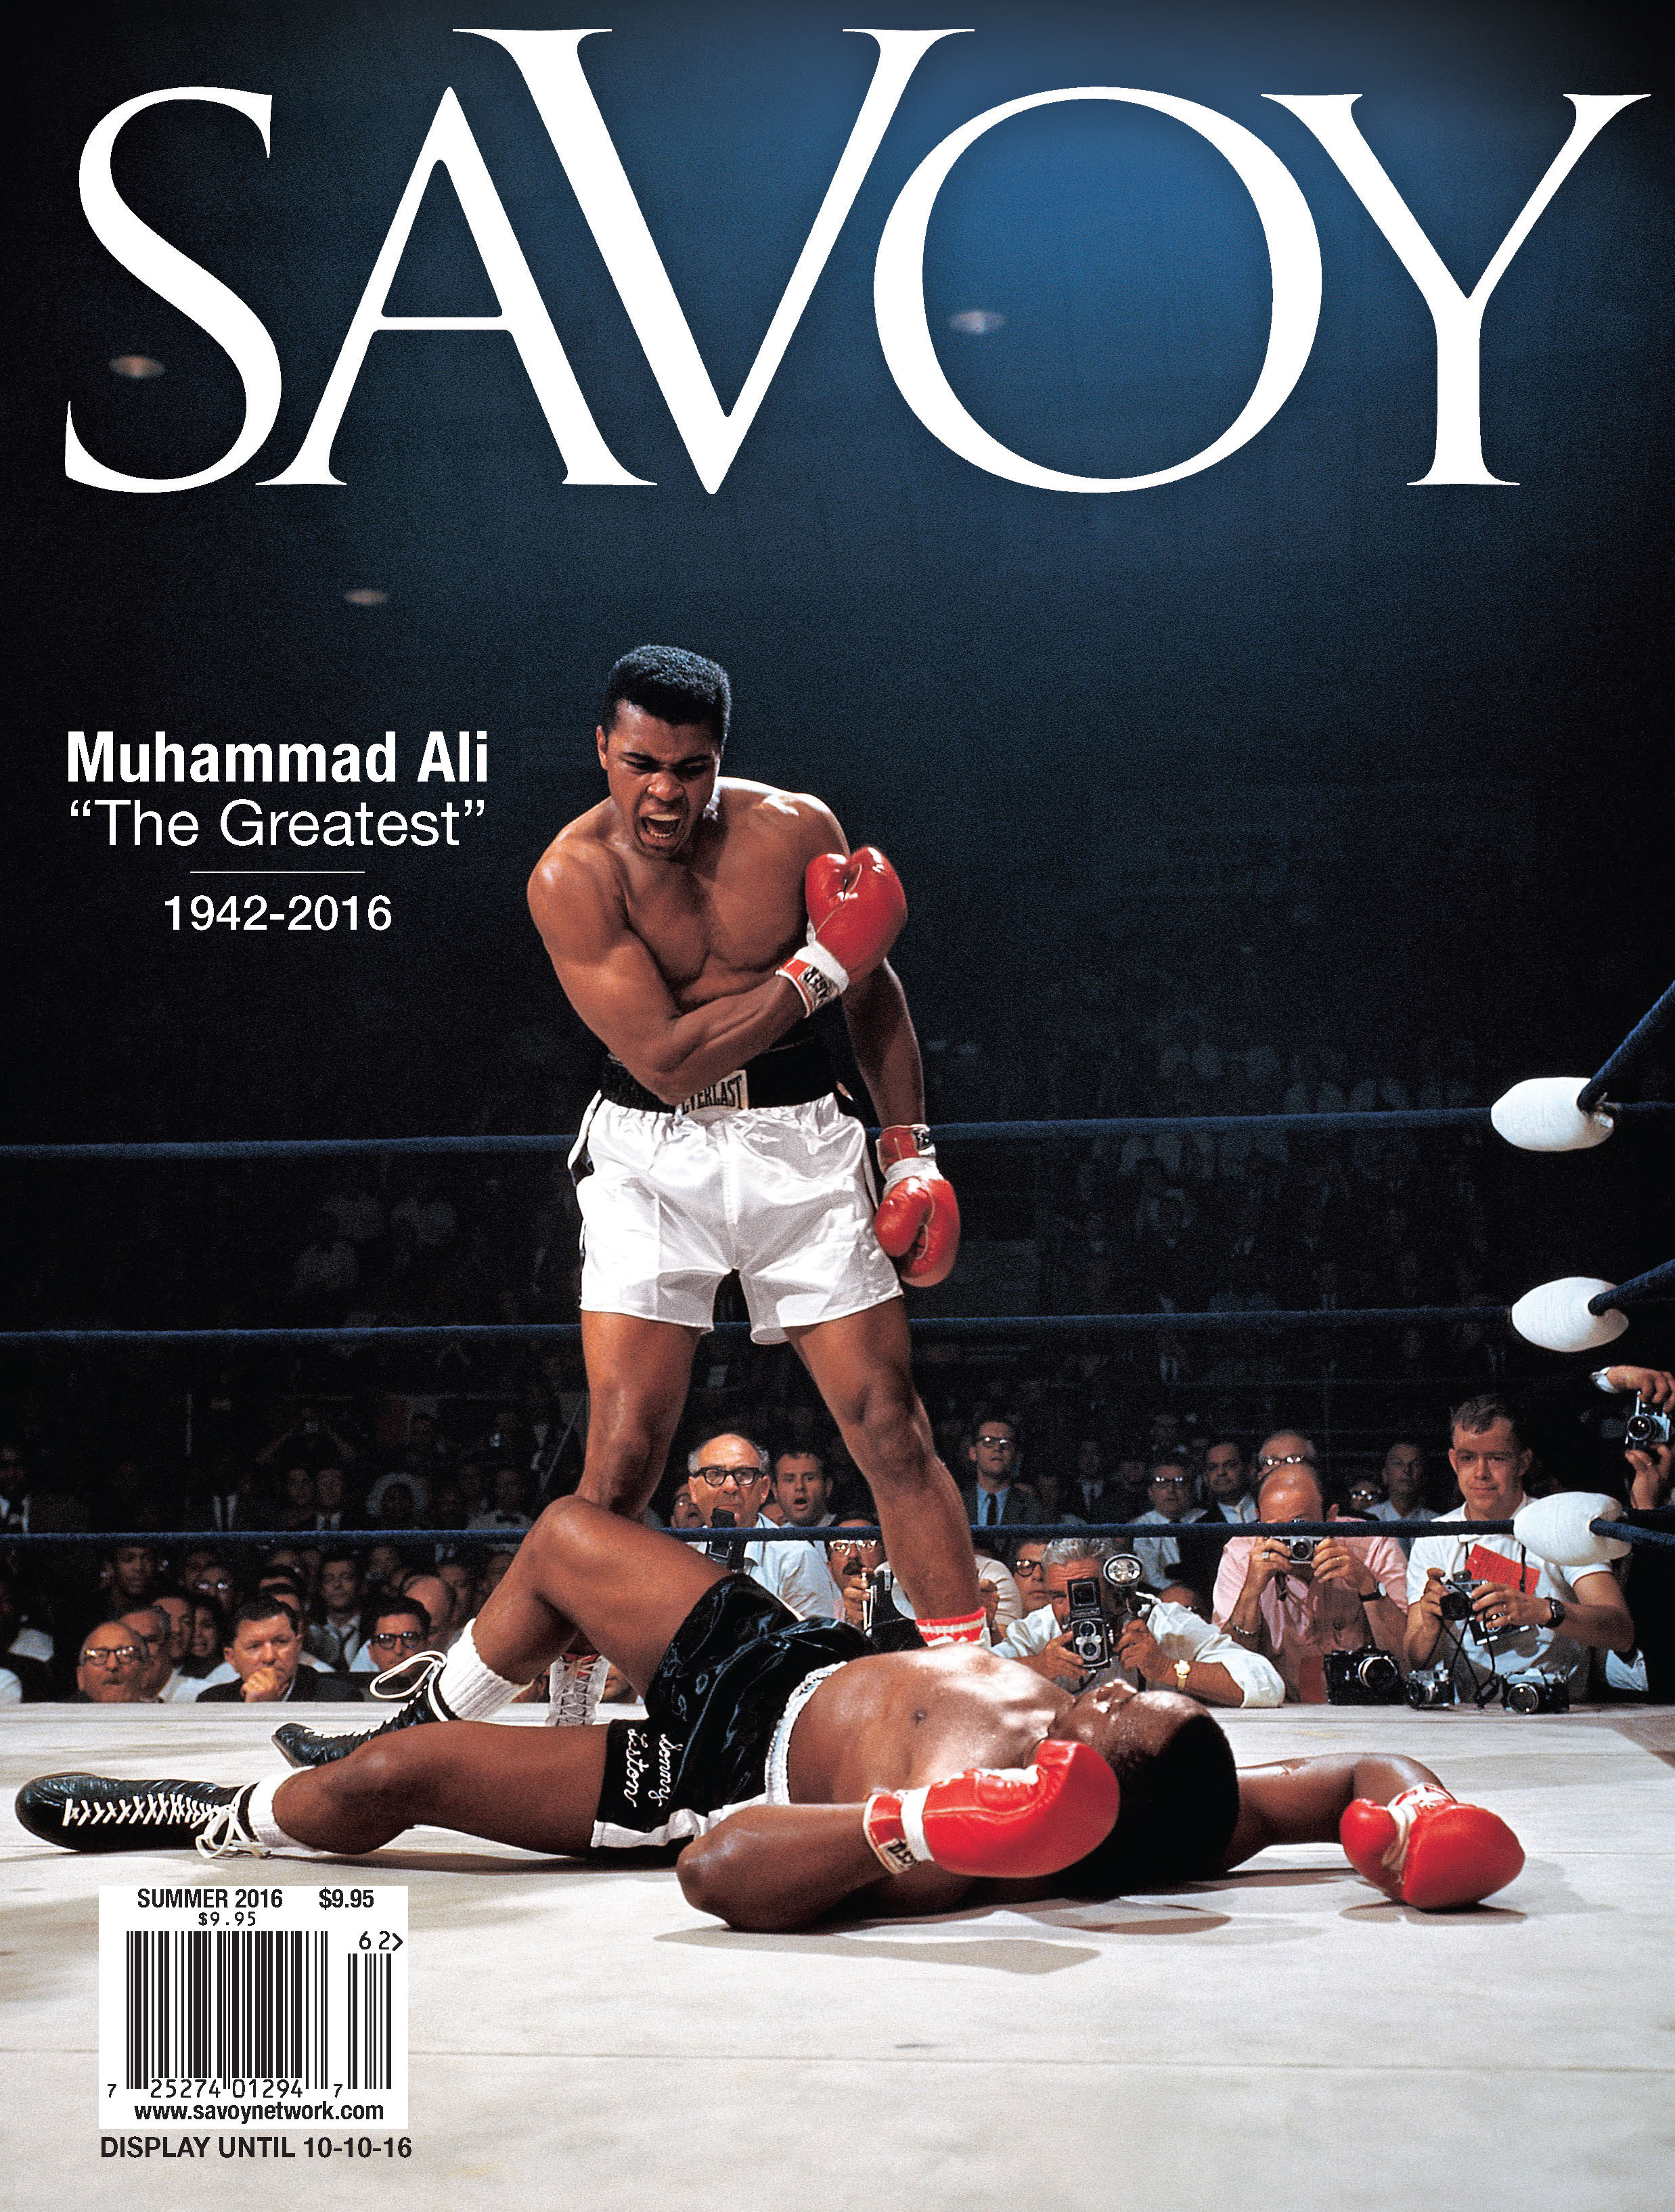 Savoy's Summer Issue Also Features a Tribute to Muhammad Ali on the 2nd Alternate Cover